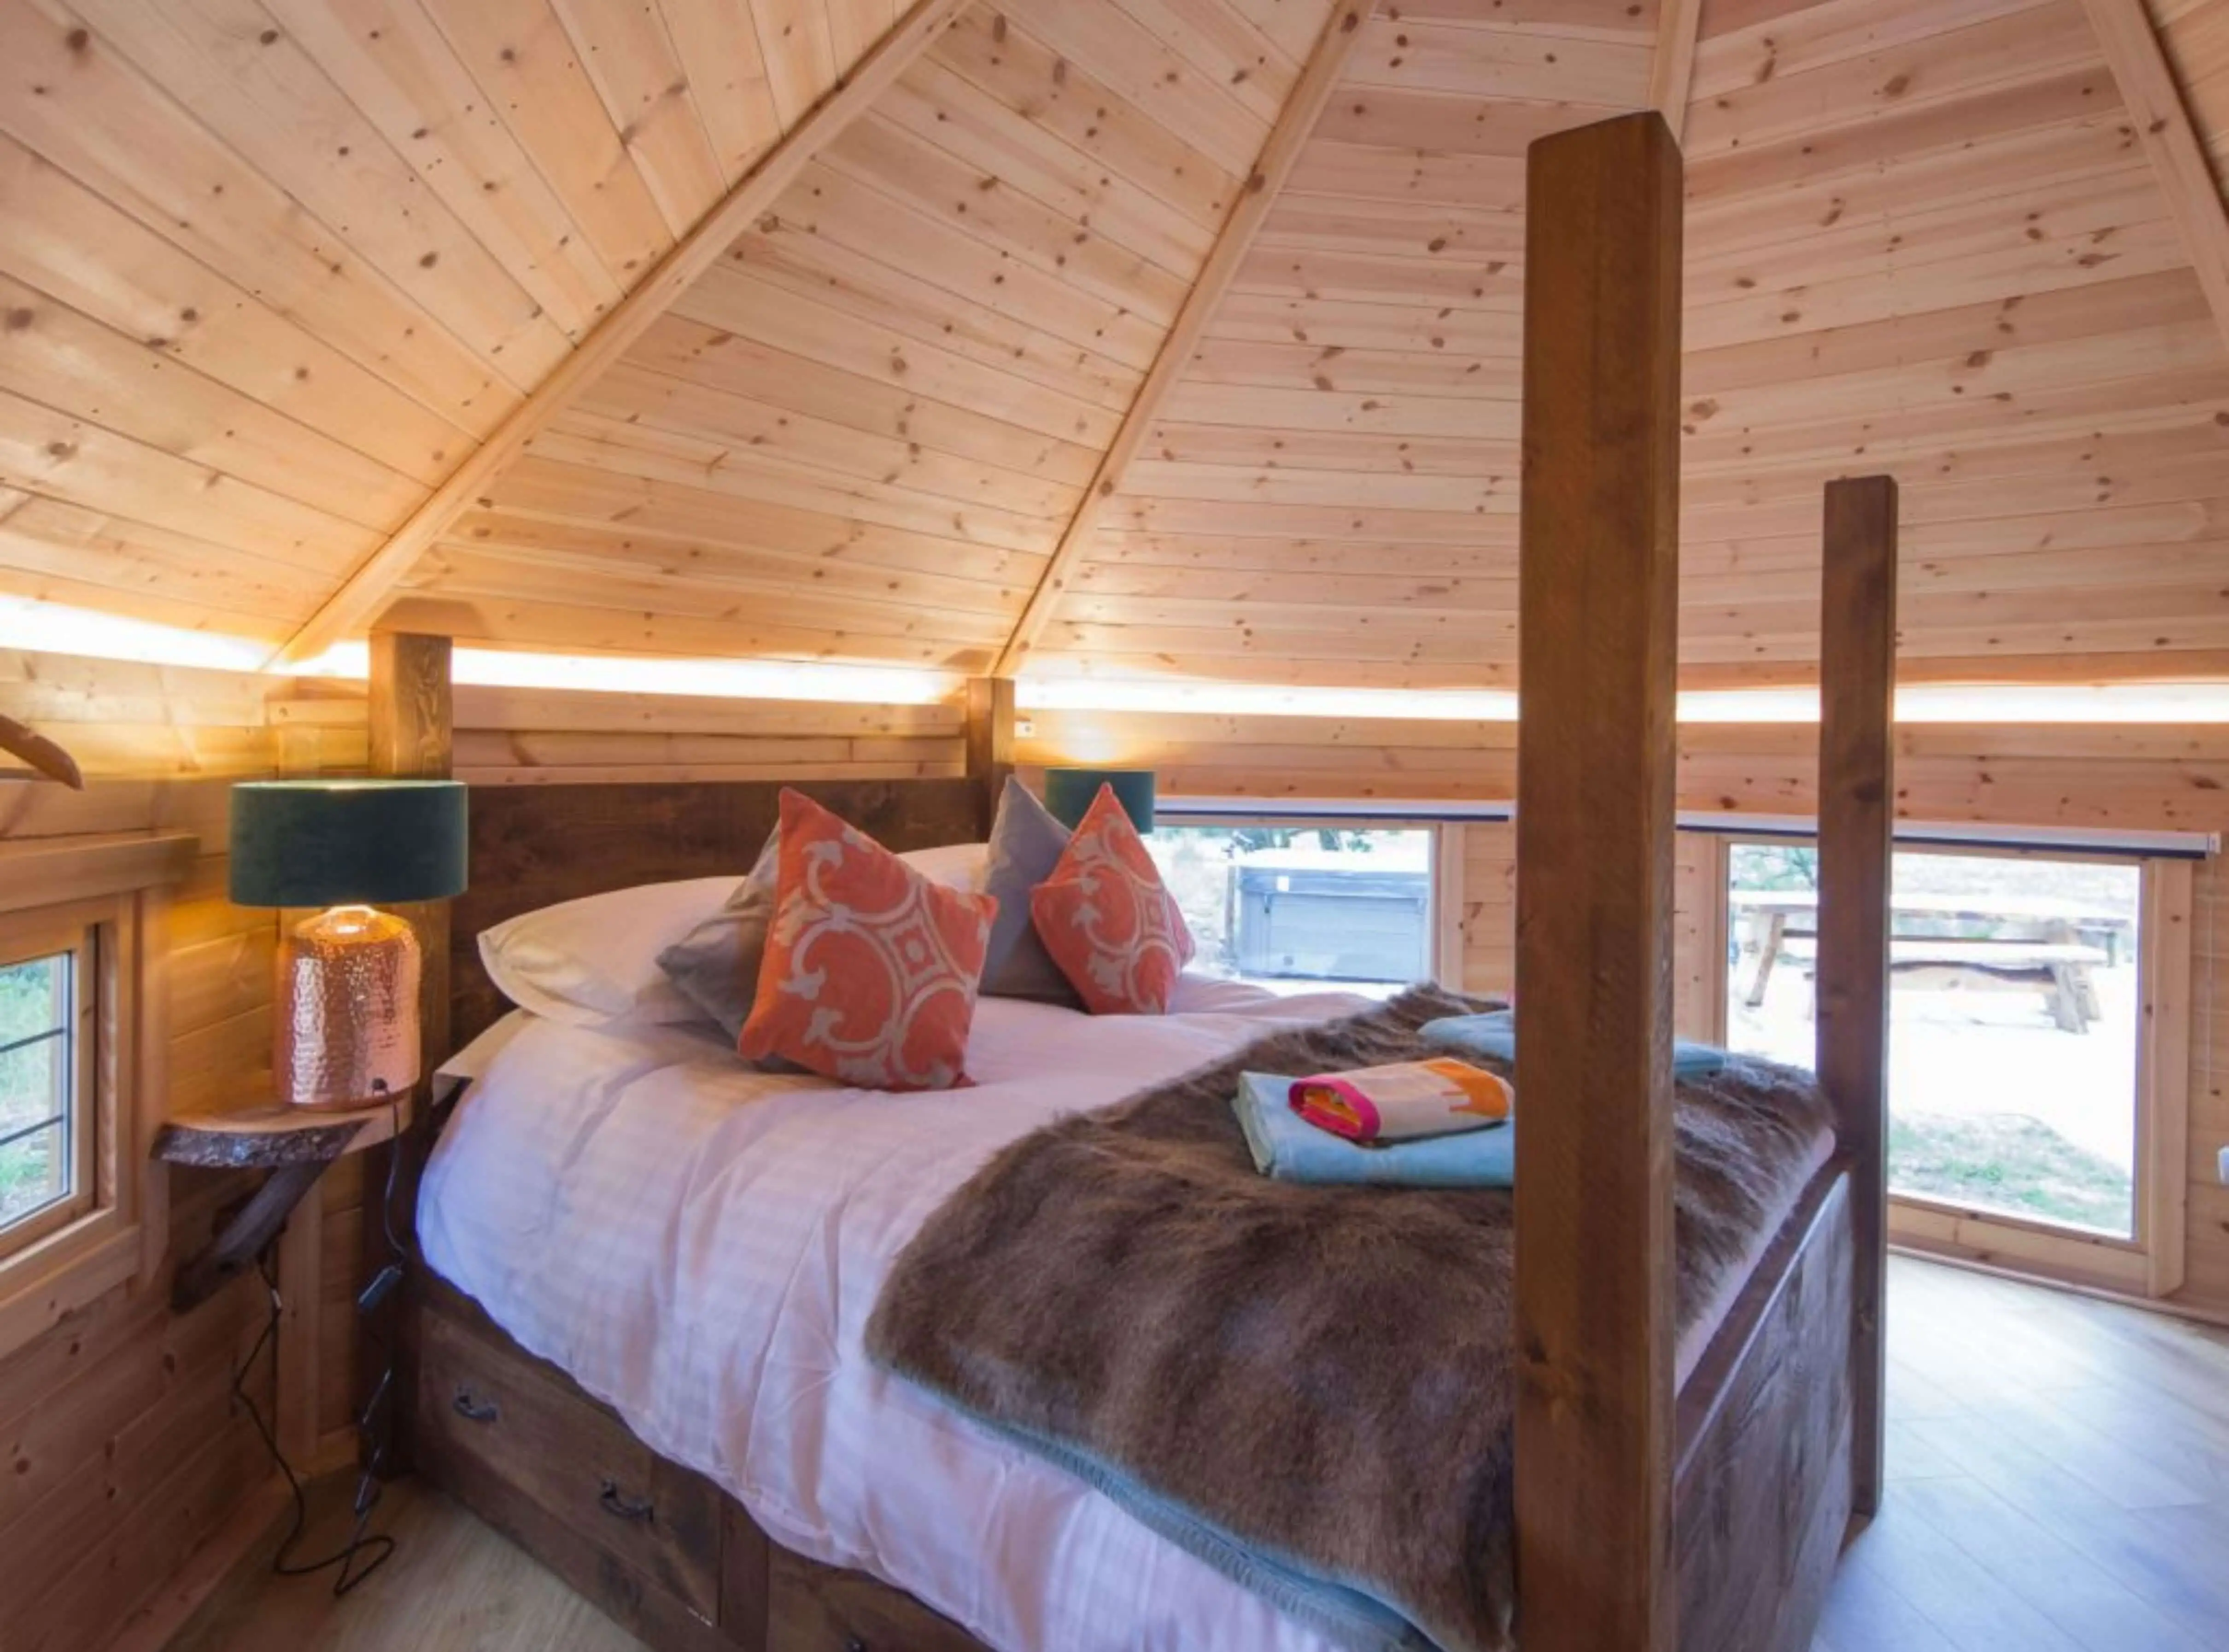 Double bed with faux fur throw and patterned cushions inside large camping cabins redwood building with 4 post bed and led lights